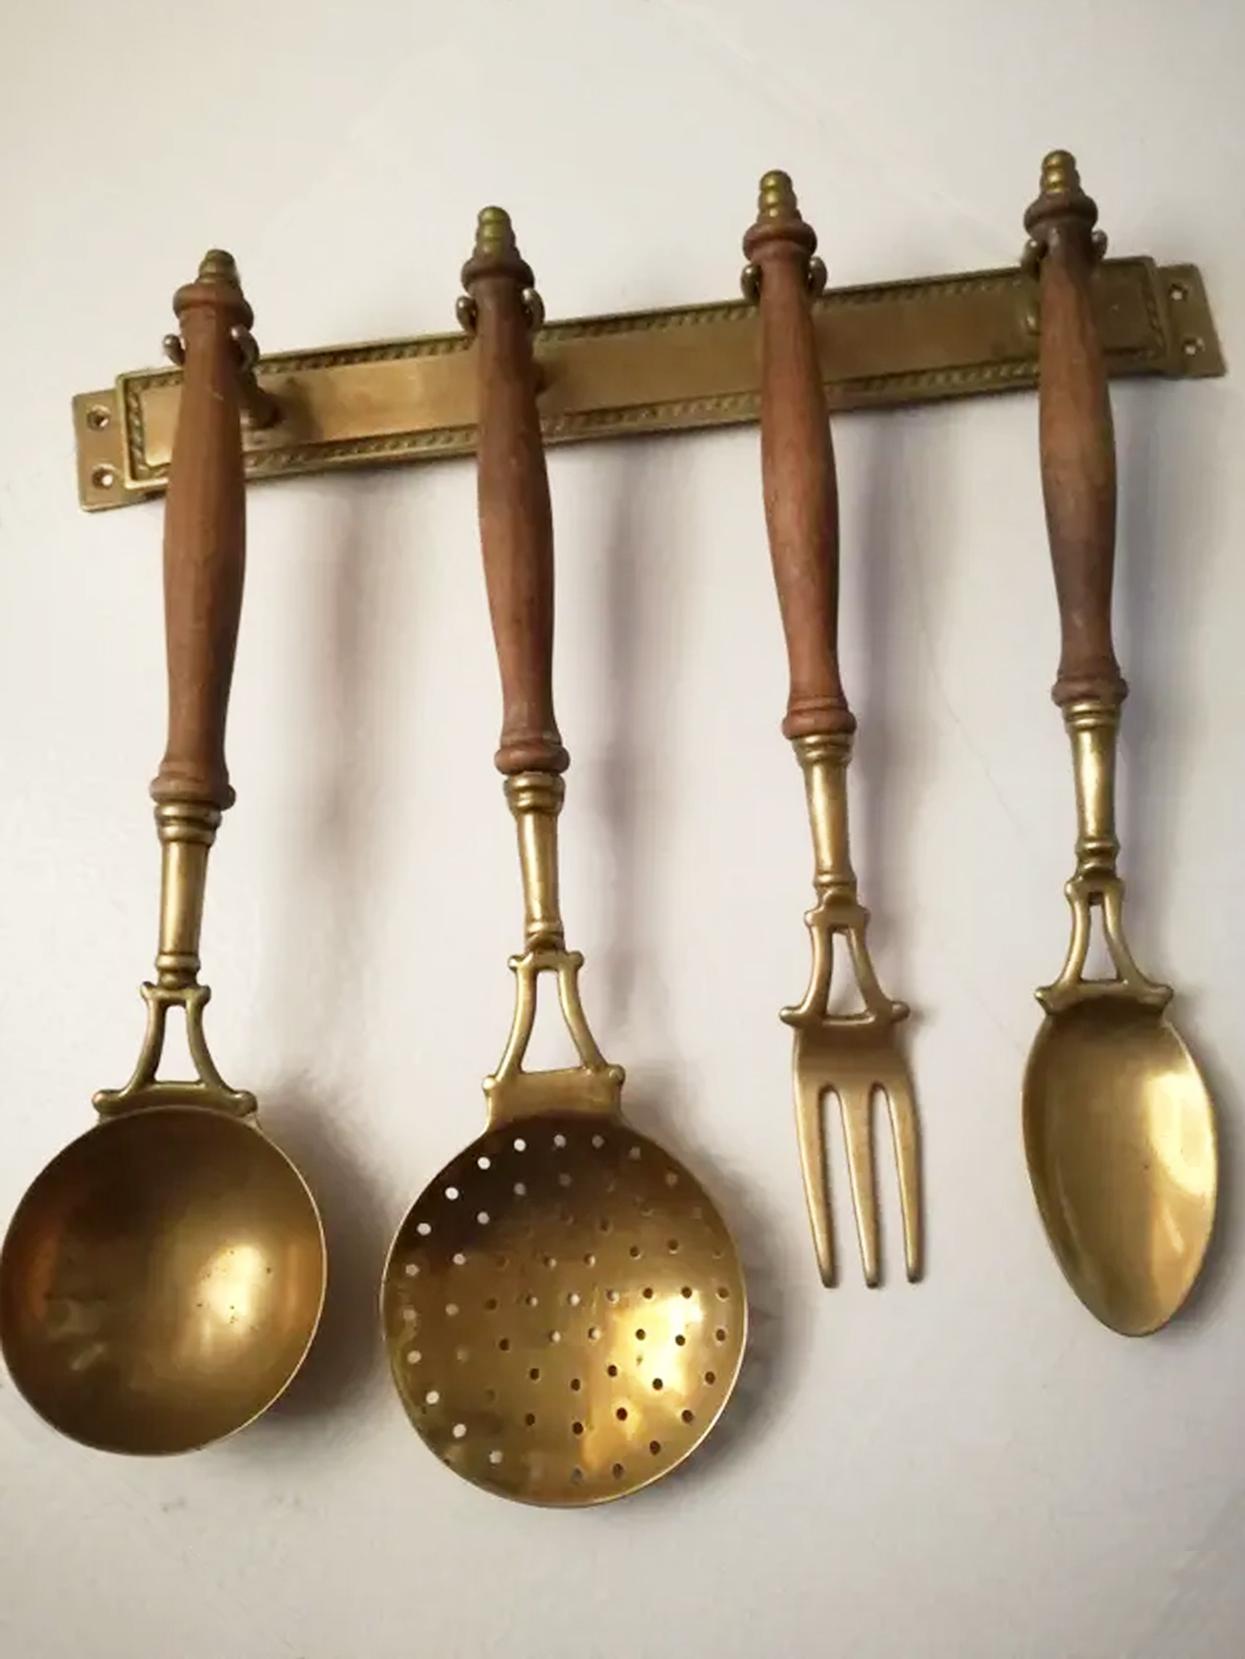 Brass Old Kitchen Utensils with from a Hanging Bar, Early 20th Century 5